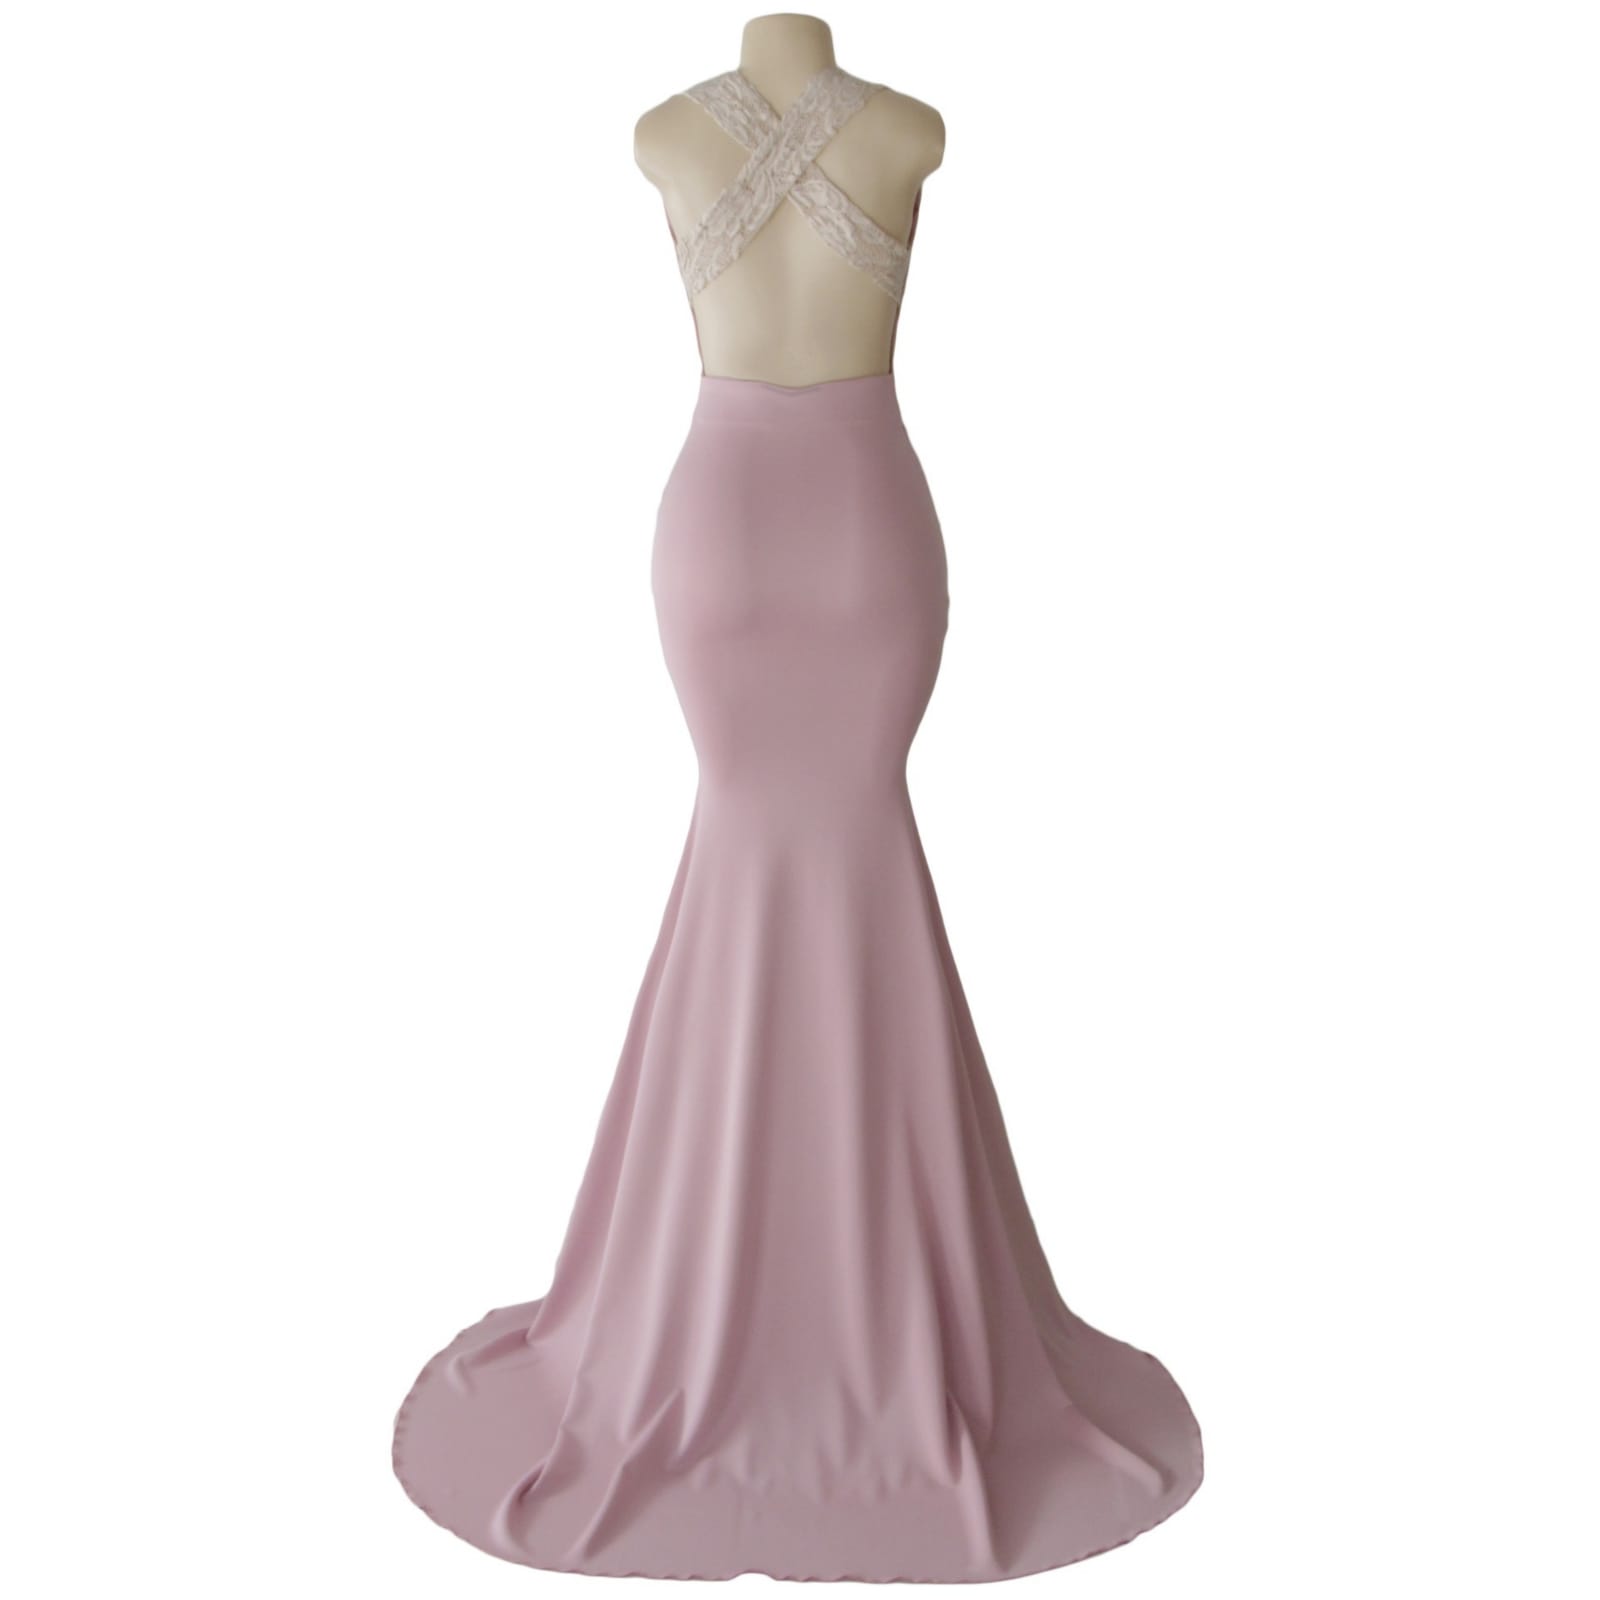 Dirty pink and cream soft mermaid prom dress 4 dirty pink and cream plunging neckline soft mermaid matric farewell dress with an open back and crossed lace back straps with a train.